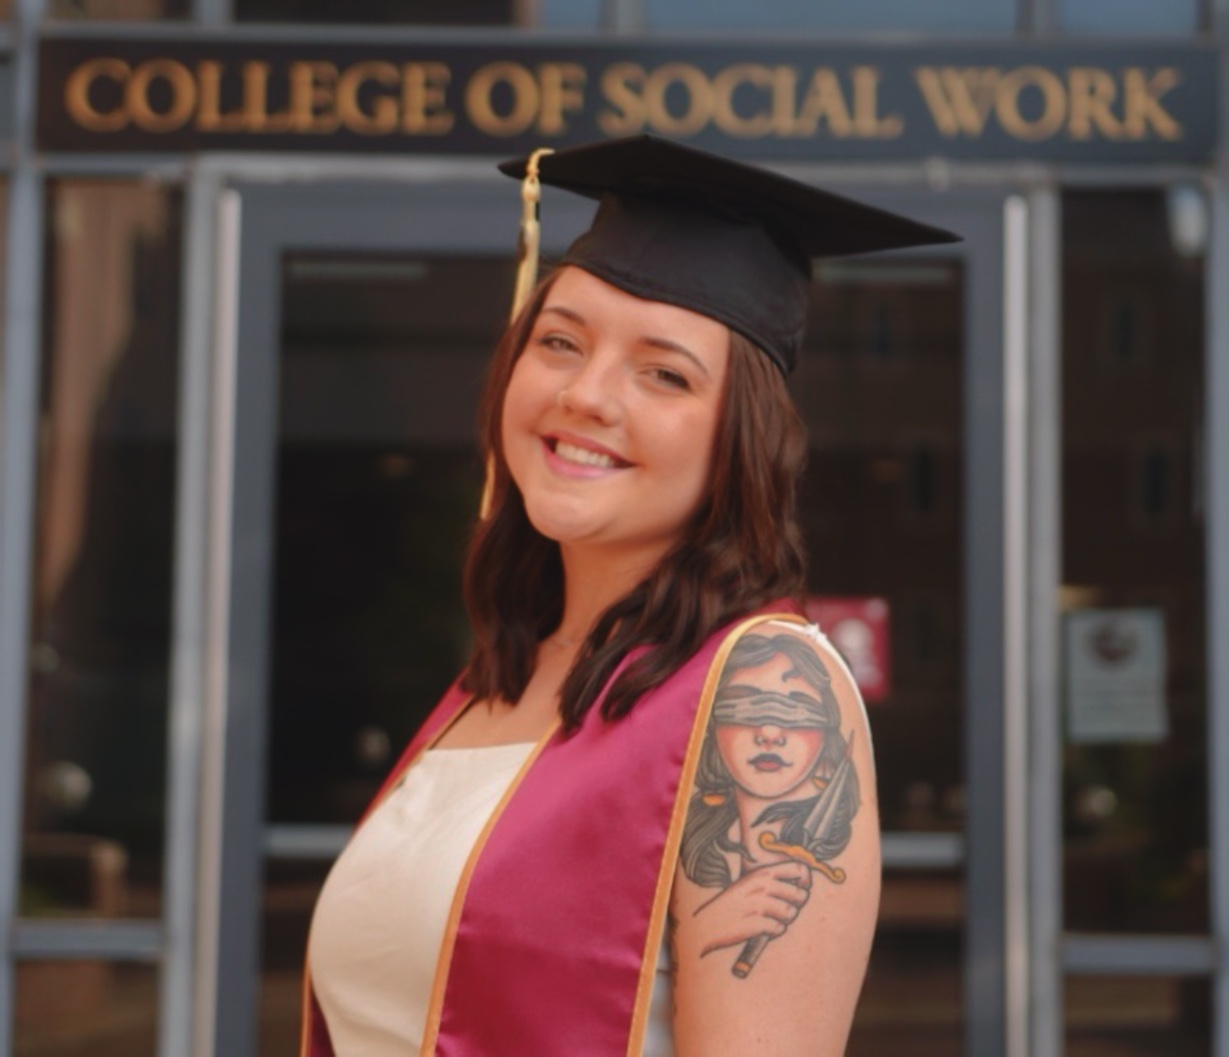 Shannon at the College of Social Work